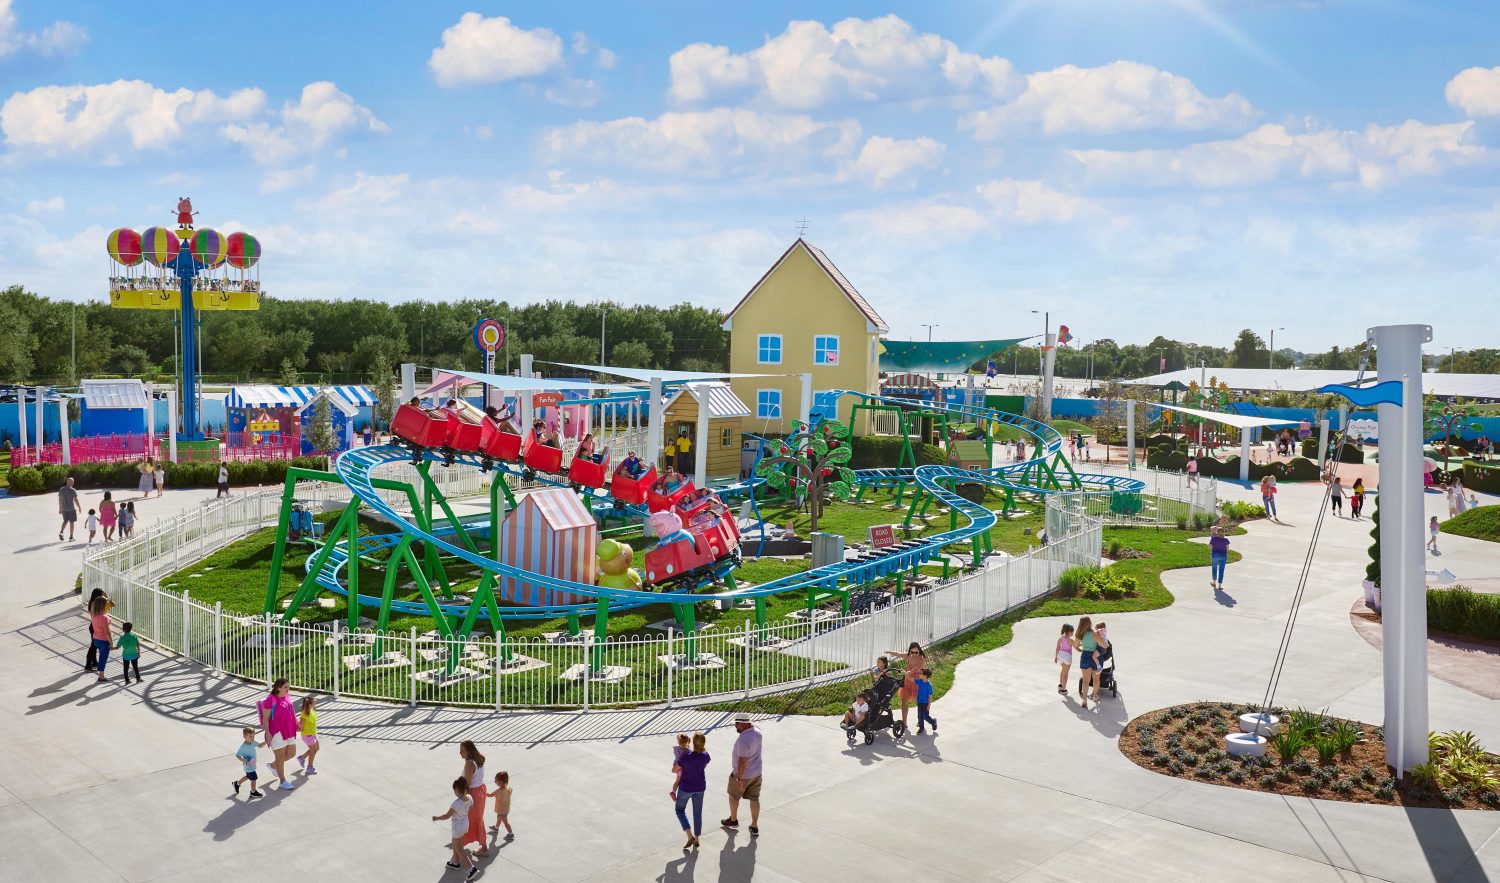 Daddy’s Pig Roller Coaster debuts at Peppa Pig Theme Park